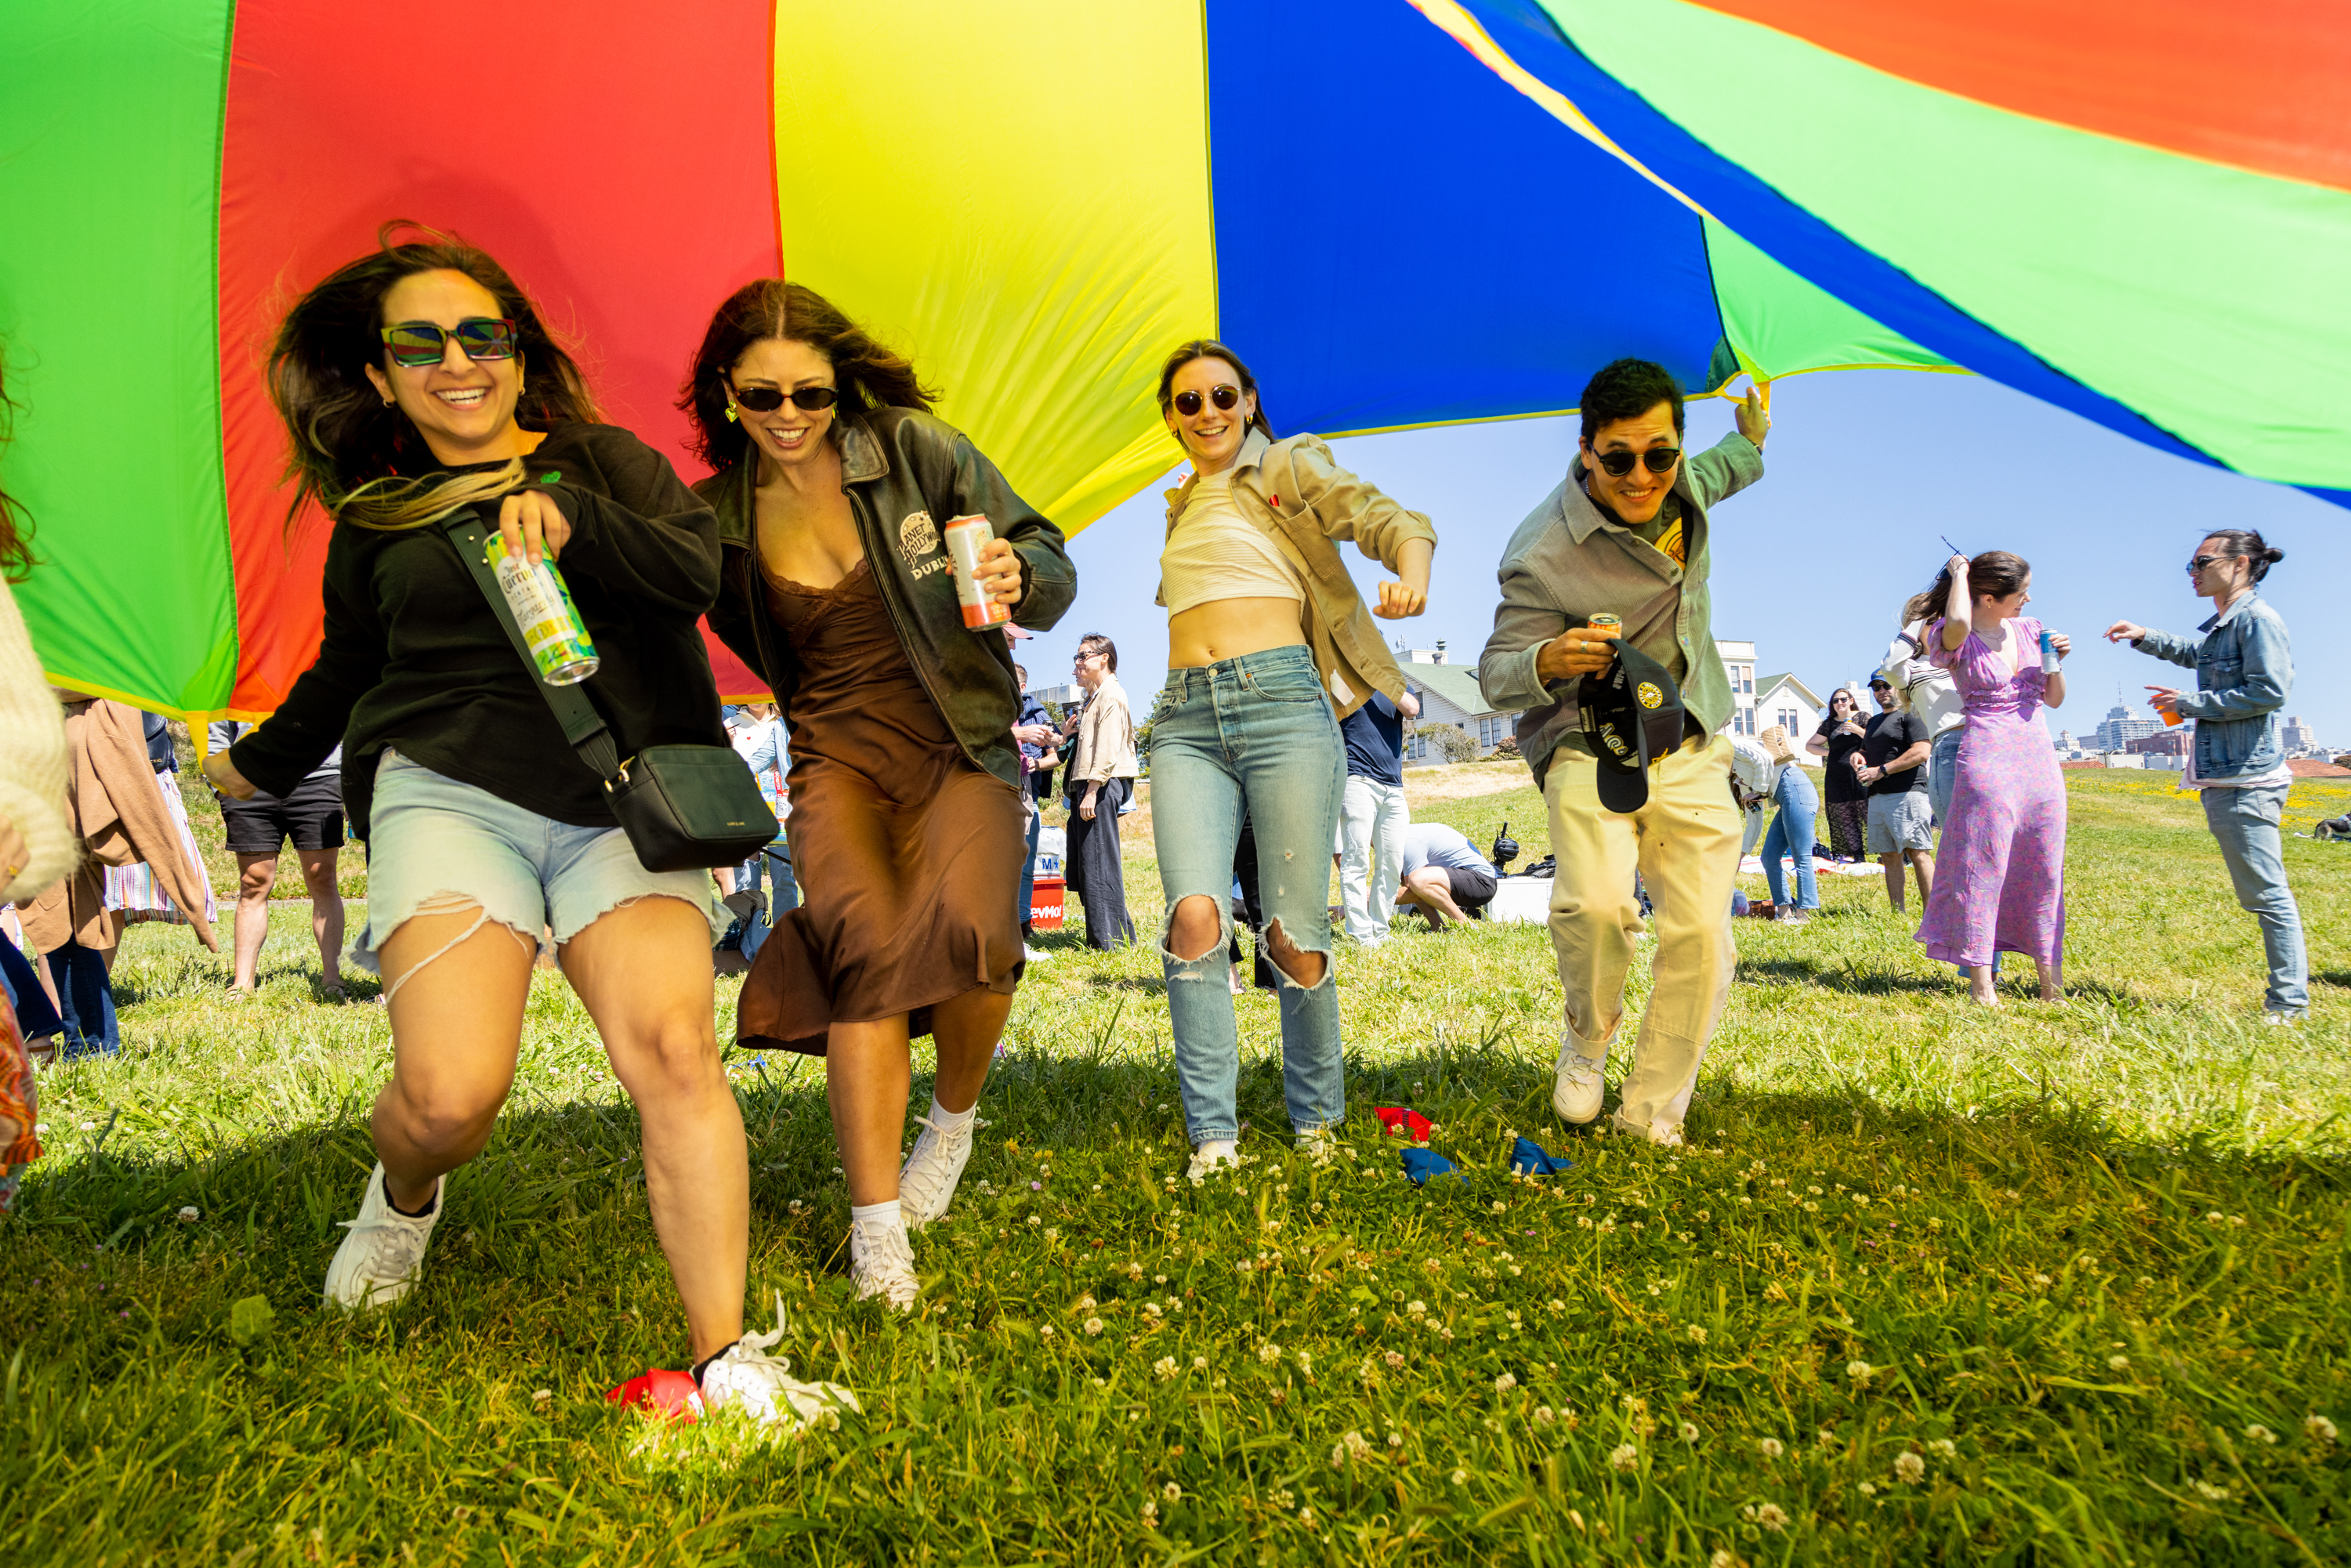 Four joyful individuals run under a colorful, large parachute on a sunny day at a lively outdoor event while holding drinks.